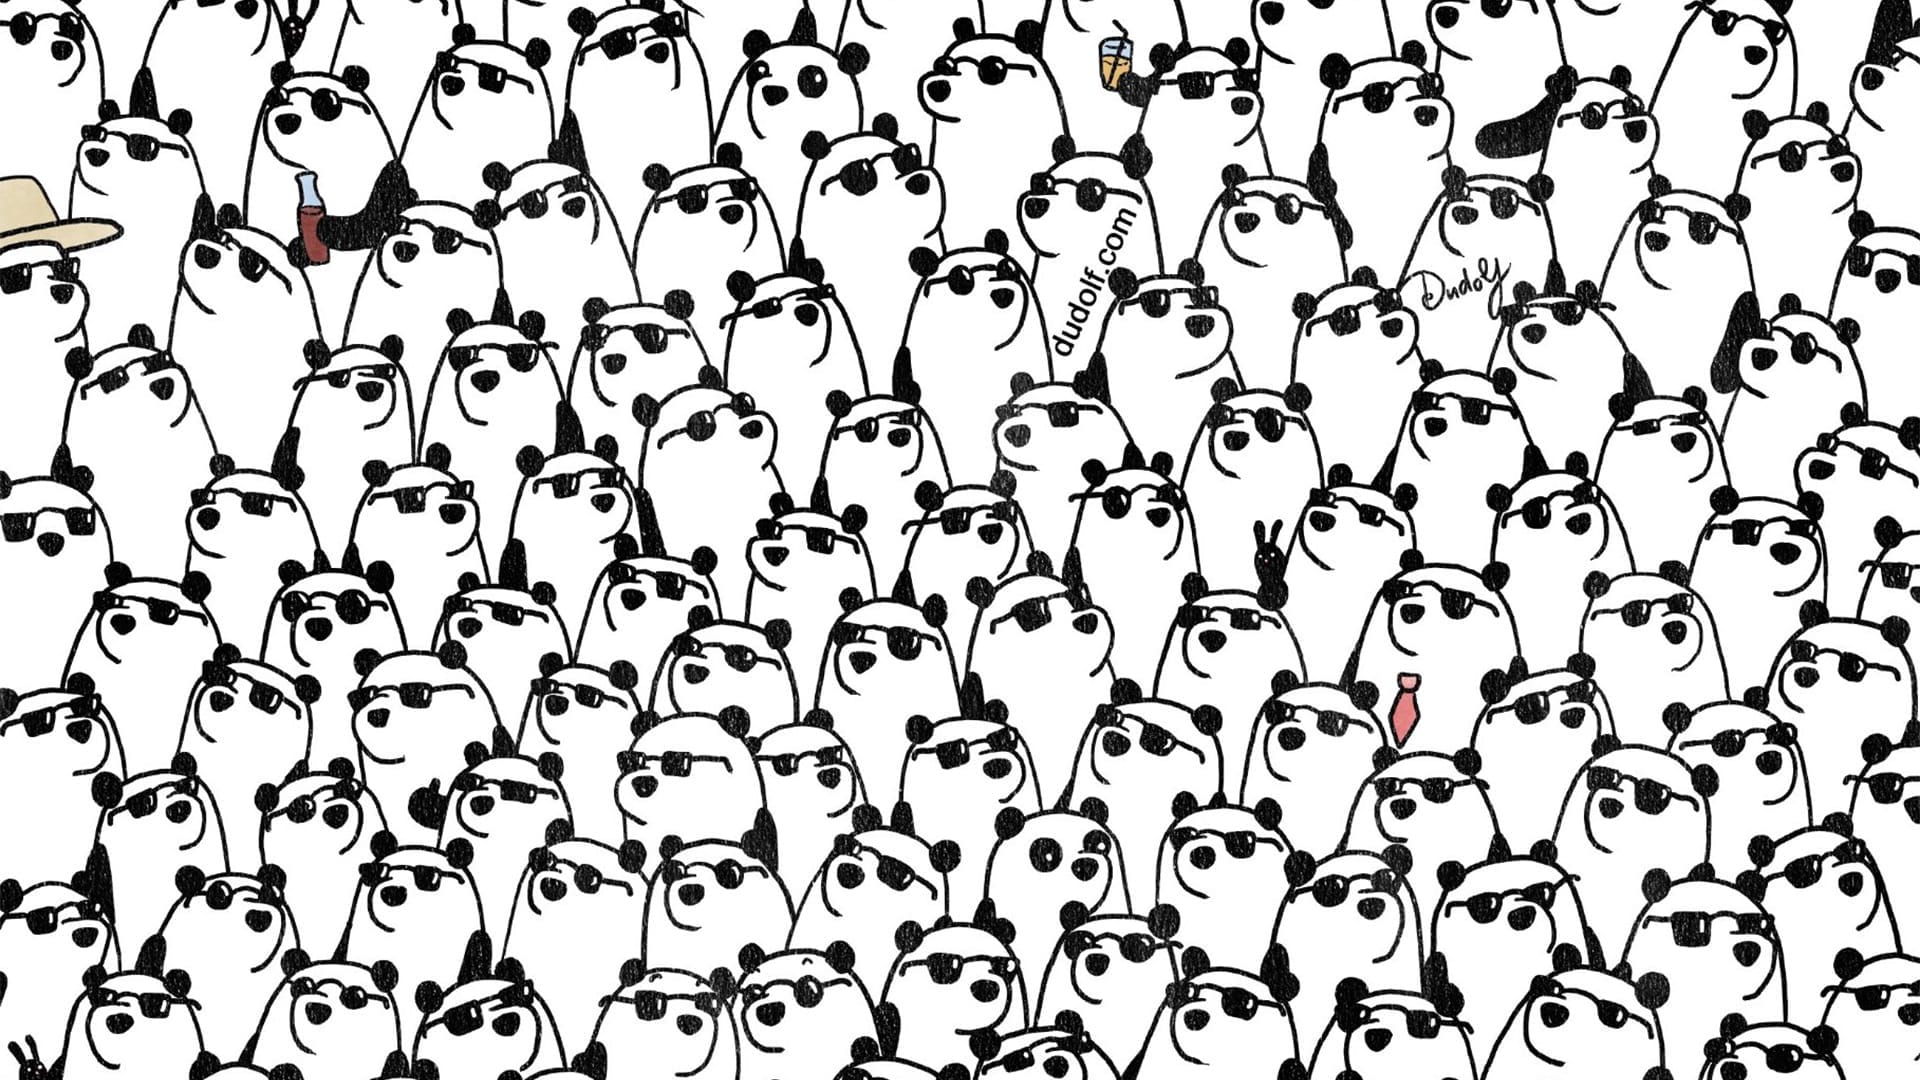 You could have a high IQ if you can find the three pandas not wearing sunglasses in 30 seconds